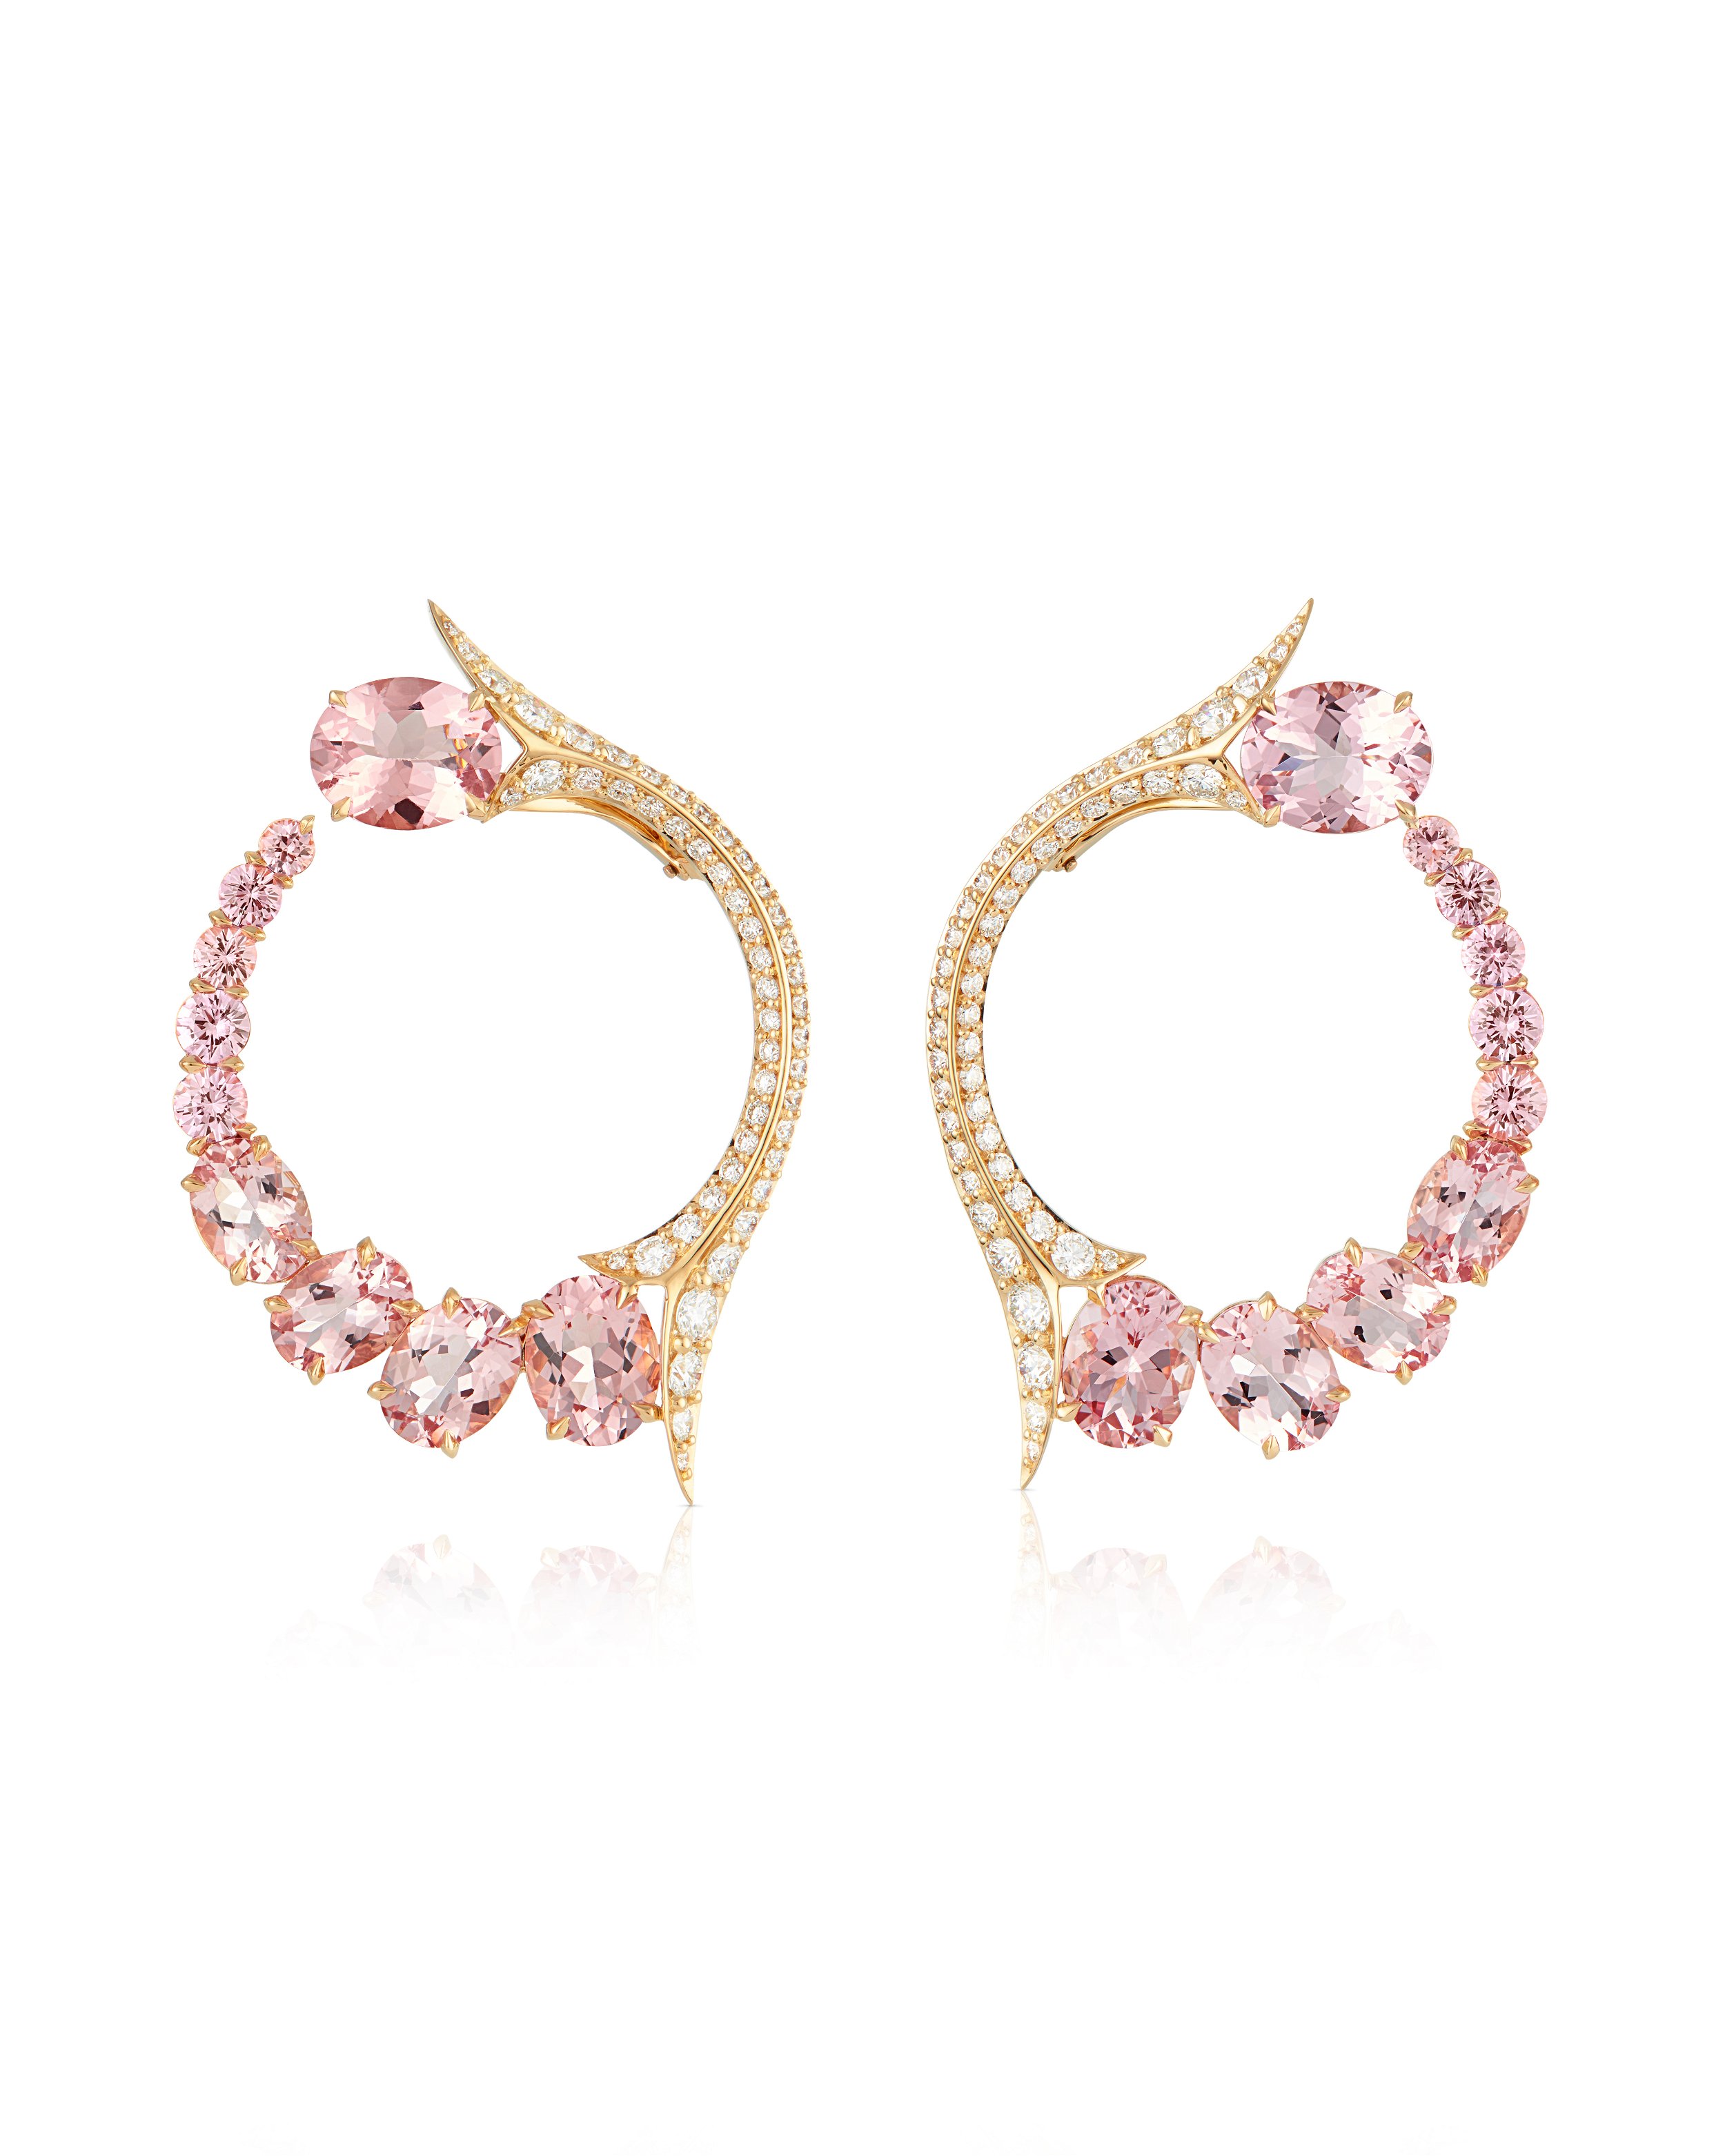 Thorn Embrace Forbidden Fruit Hoop Earrings with Morganite, Pink Sapphire and White Diamonds in 18kt Yellow Gold